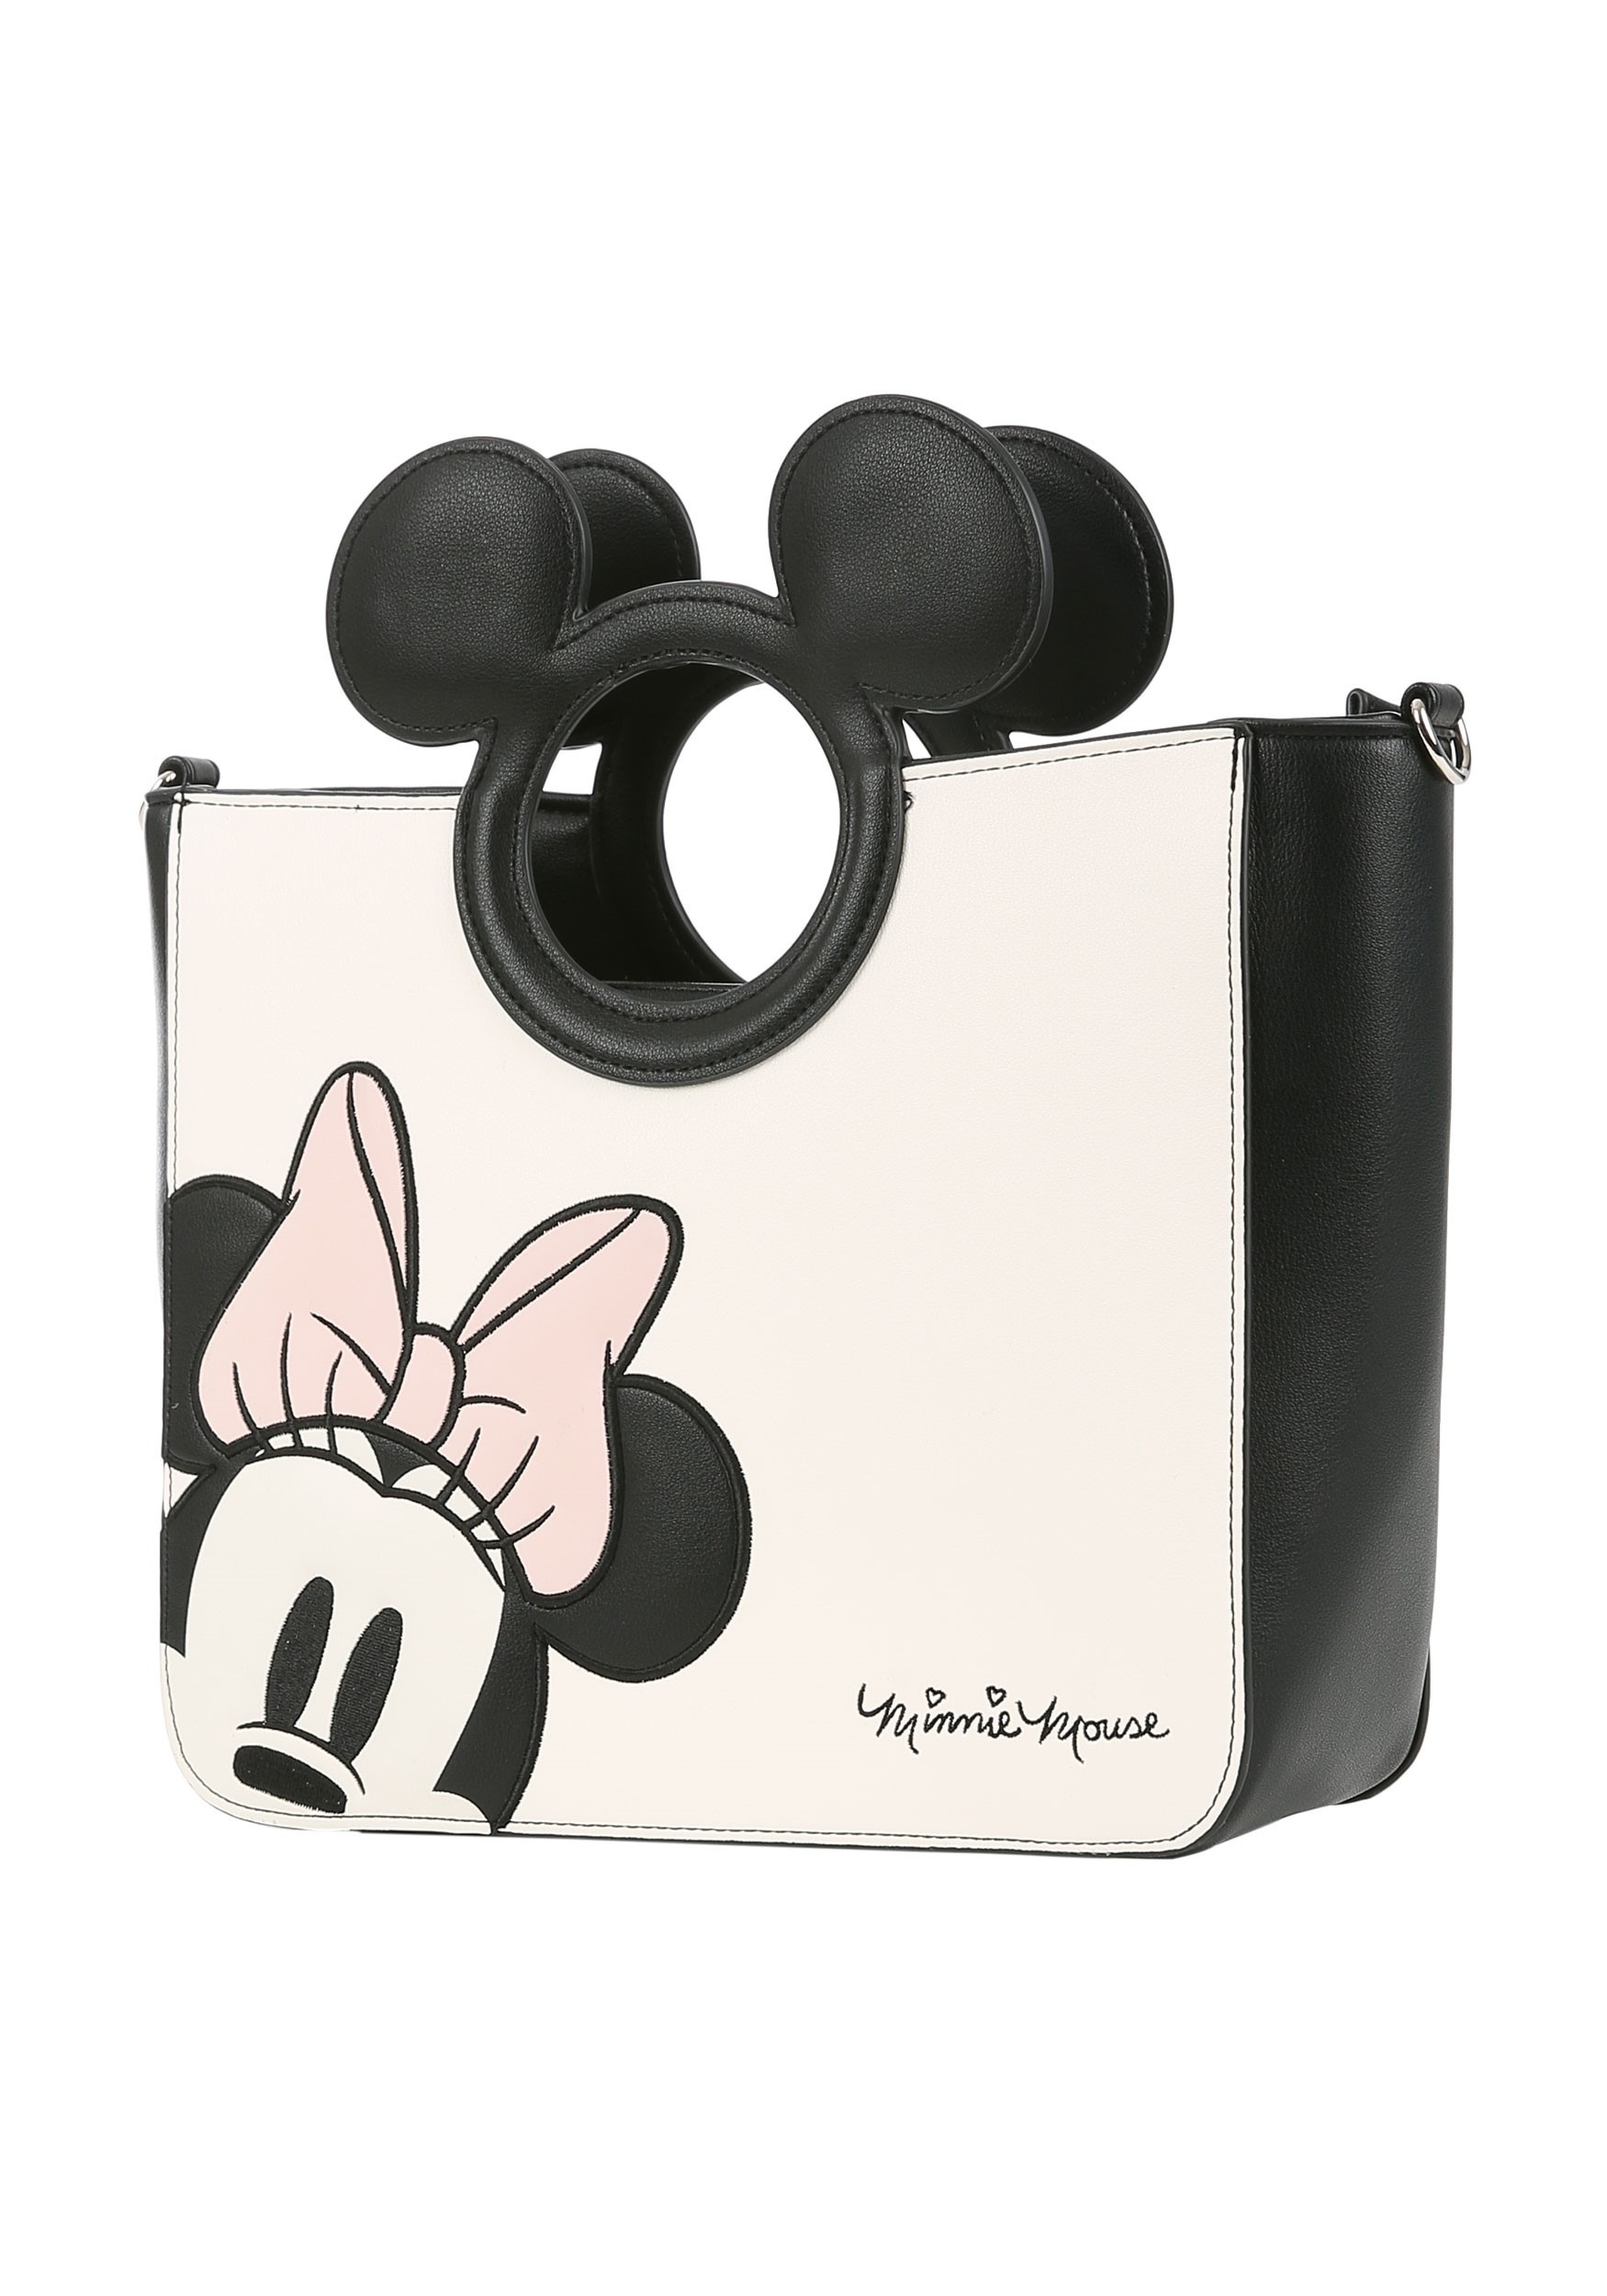 Loungefly Disney Minnie Mouse Faux Leather Bag with Crossbody Strap